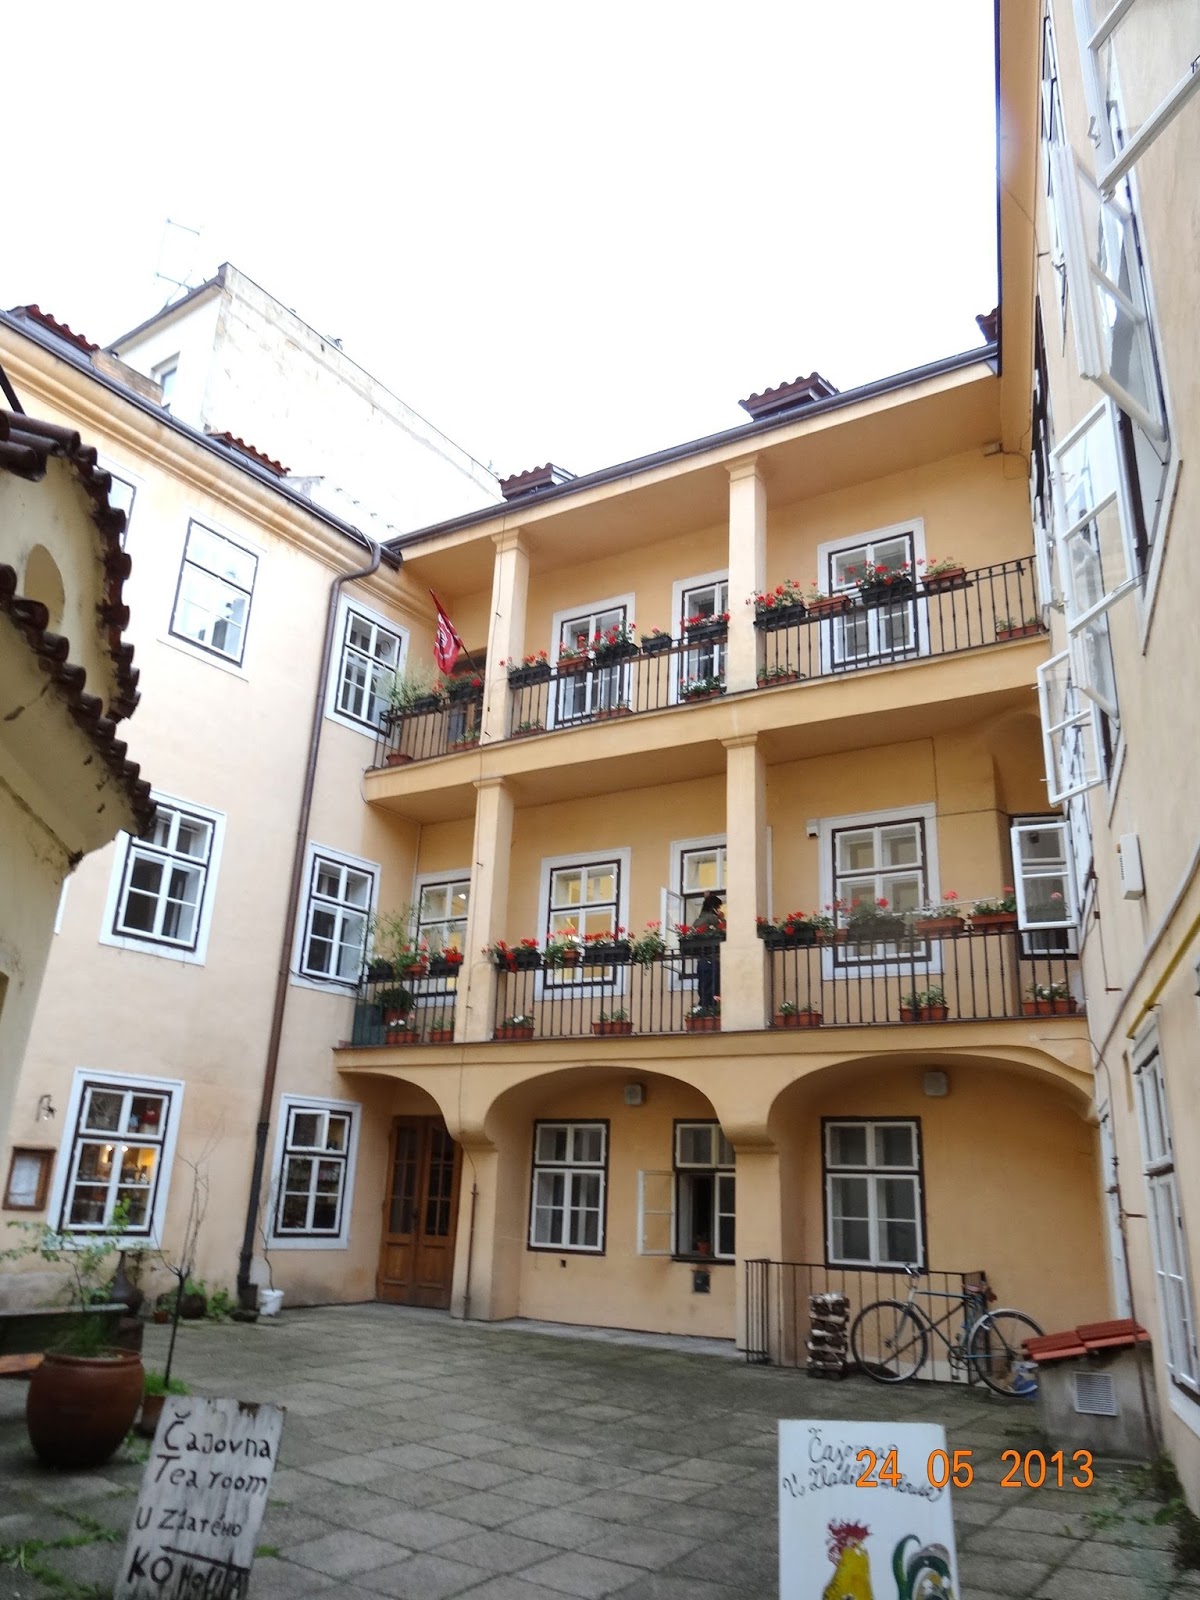 Old Town backyard with Classical balcony corridors that look somewhat differently than in Zizkov